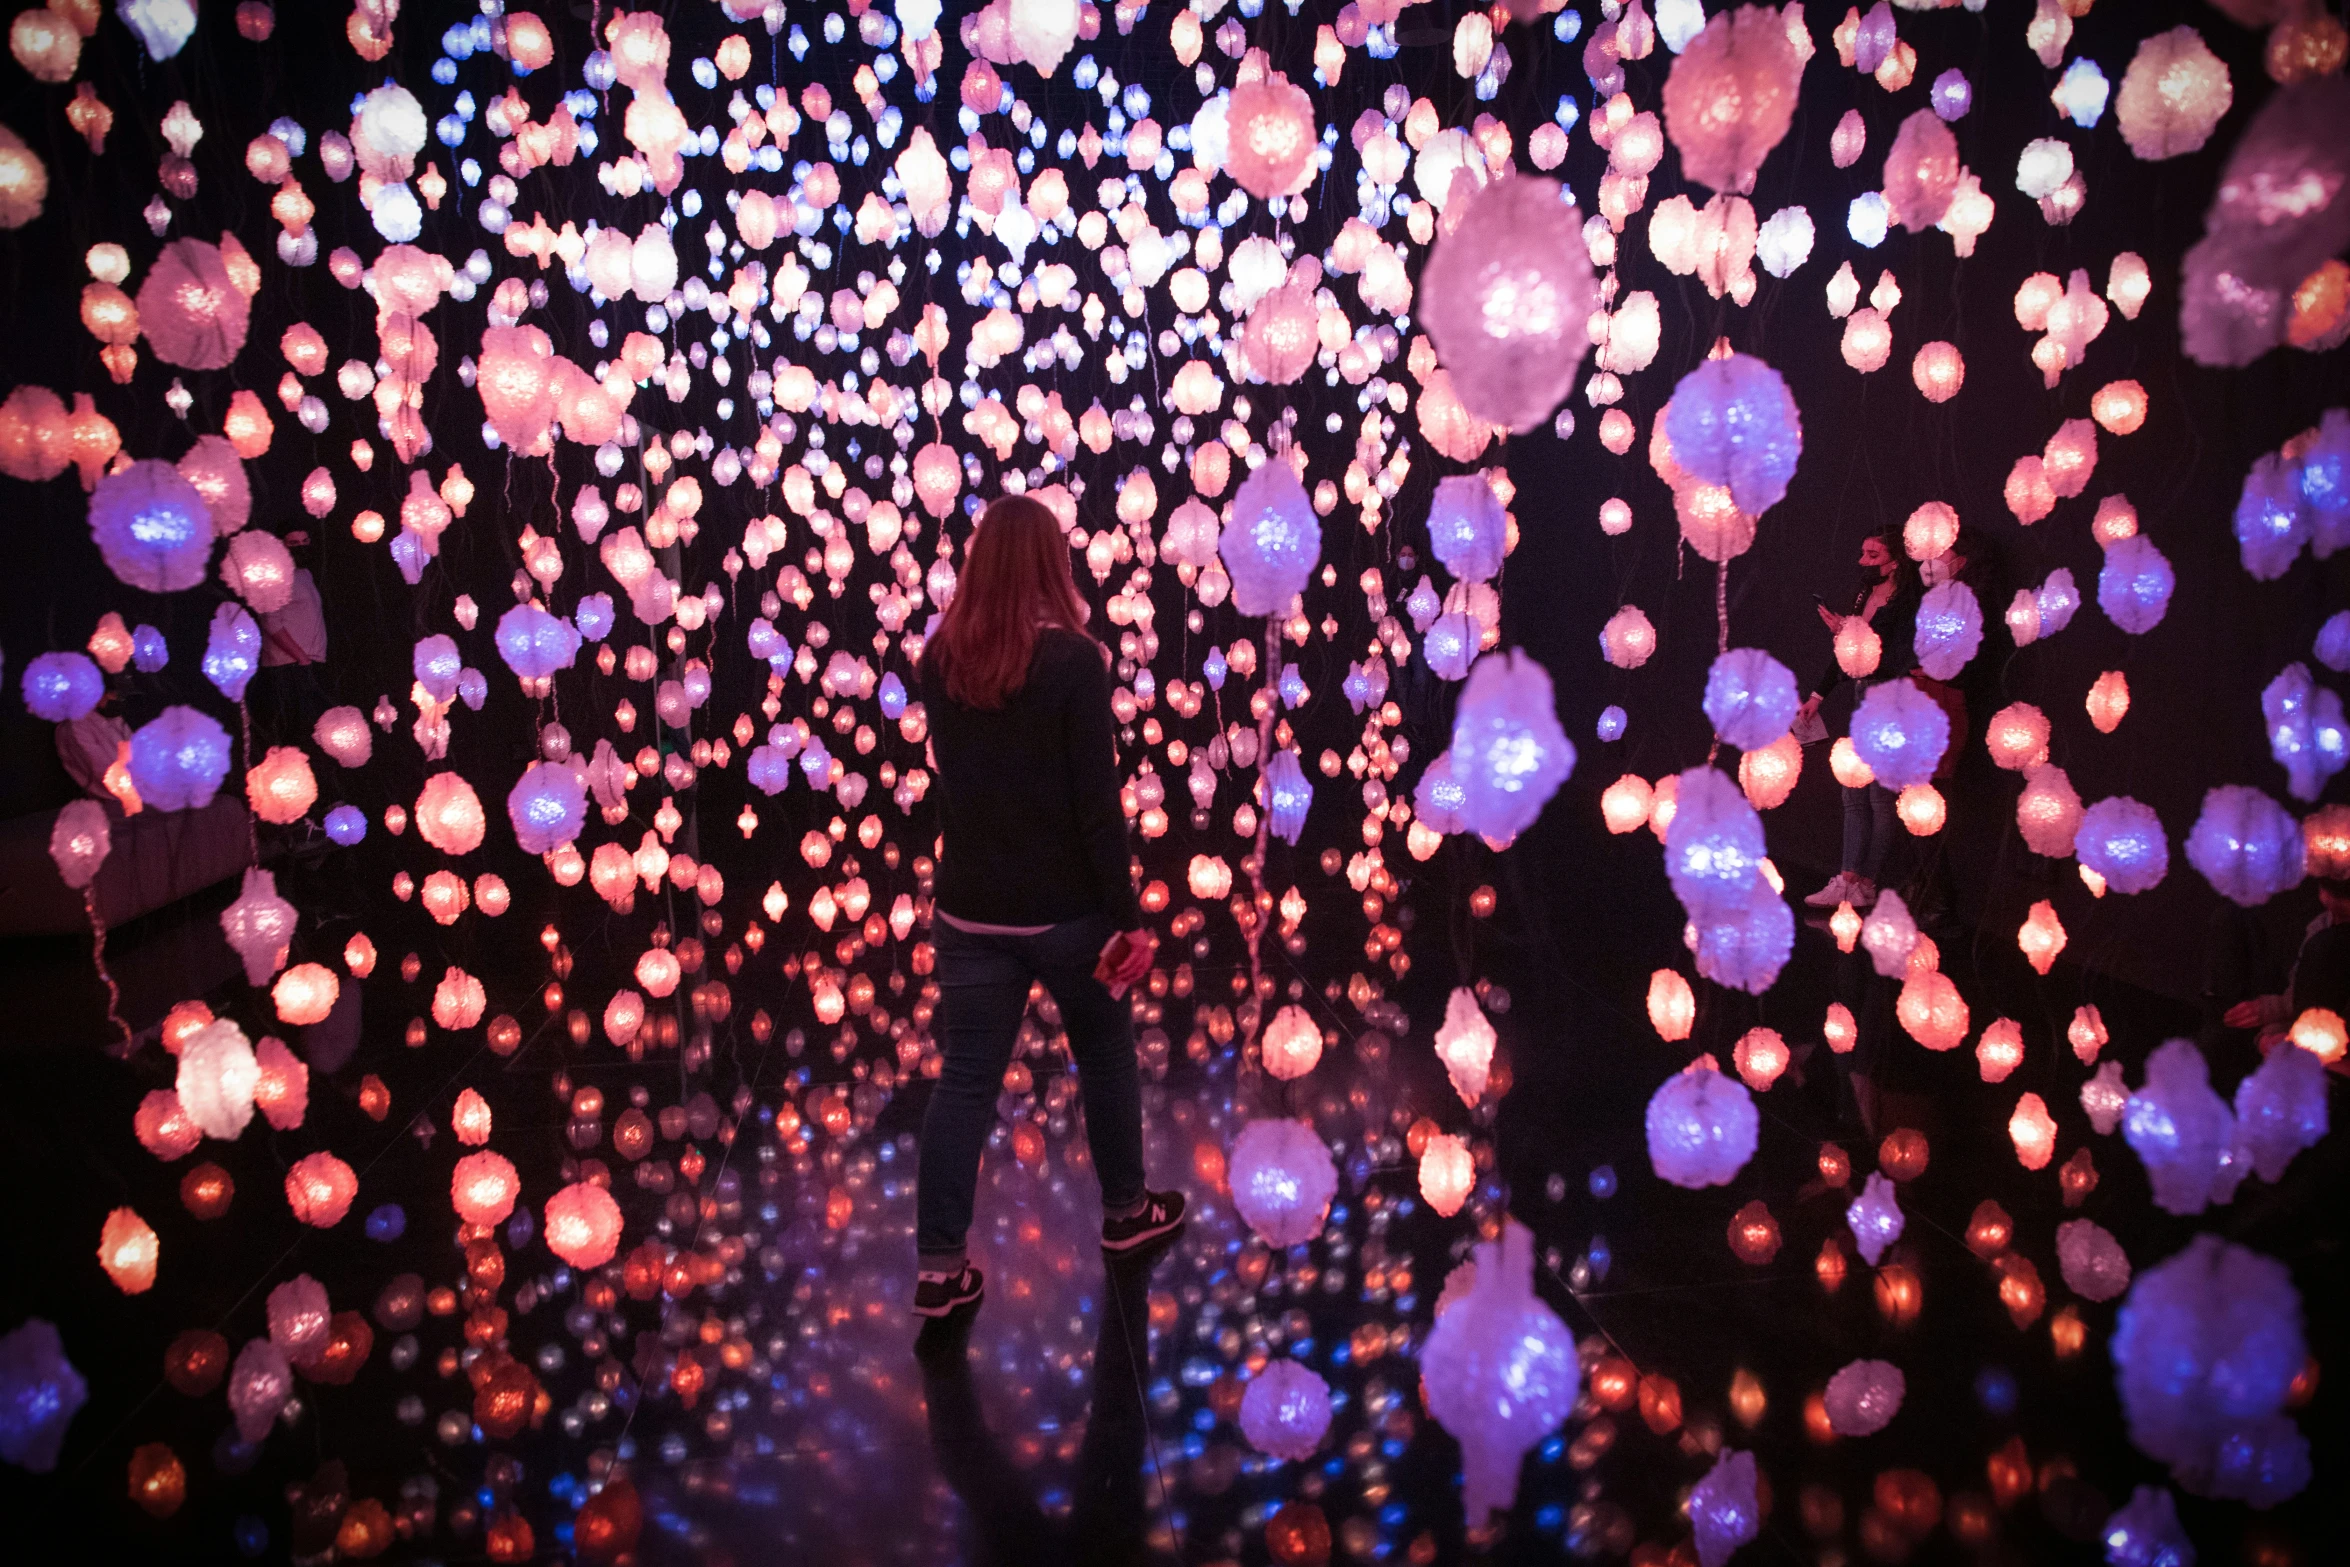 the woman is standing in the middle of the tunnel of balloons